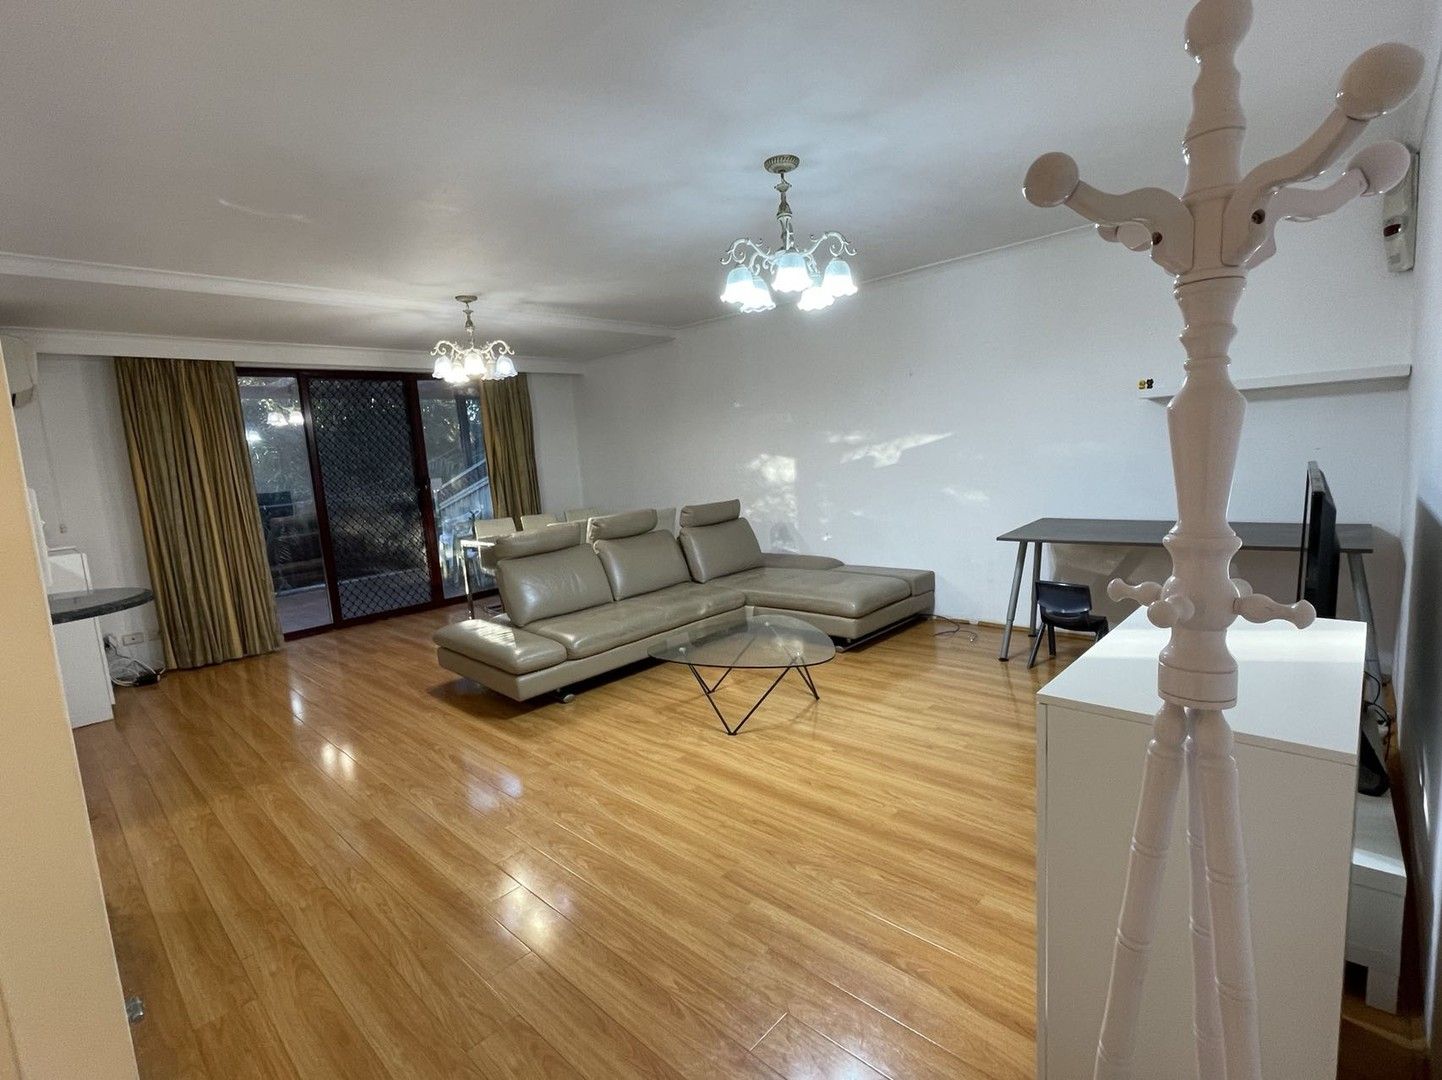 3 bedrooms Apartment / Unit / Flat in 16/18 Knocklayde Street ASHFIELD NSW, 2131